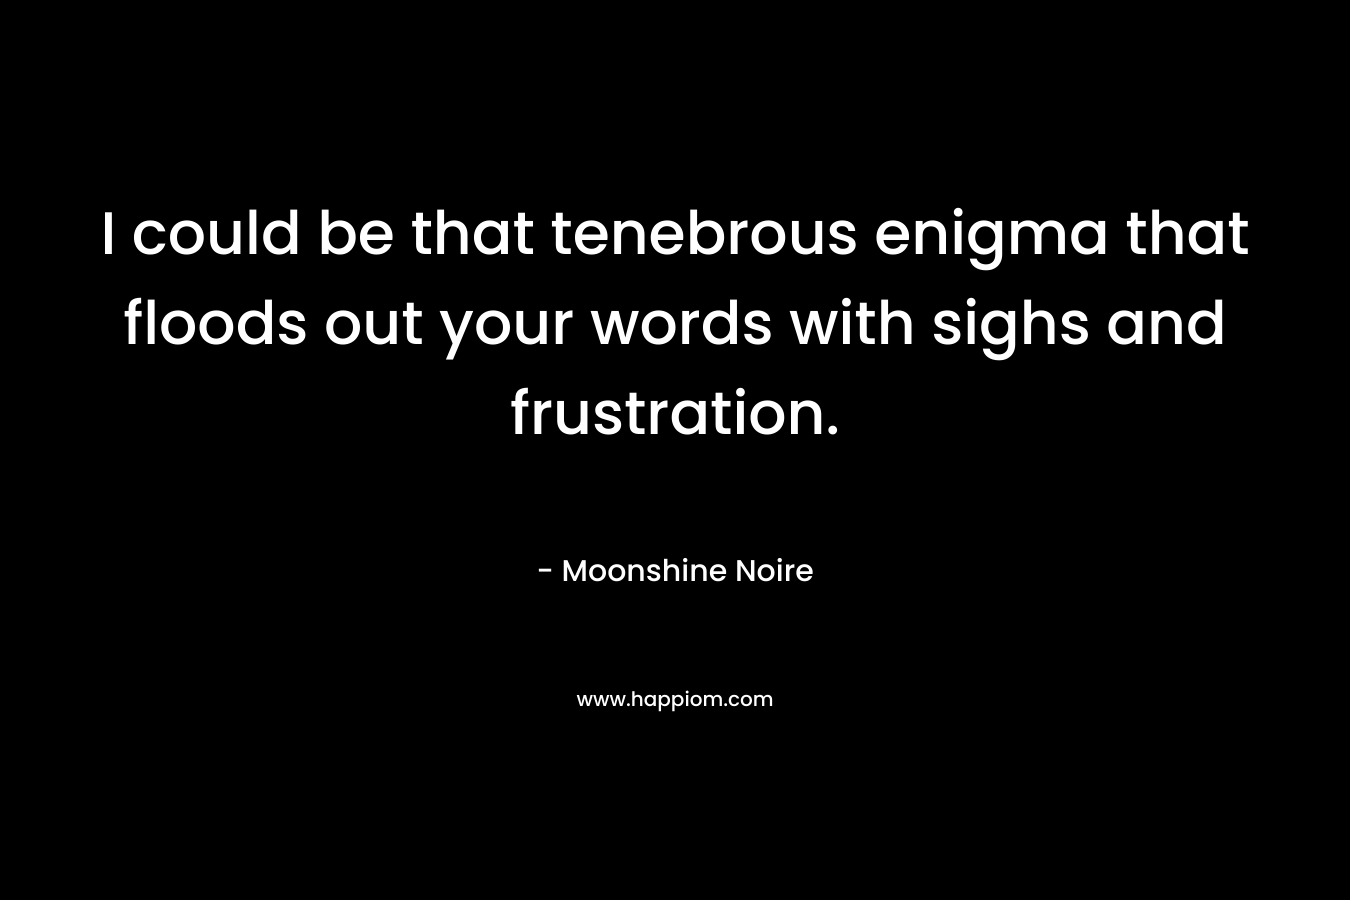 I could be that tenebrous enigma that floods out your words with sighs and frustration. – Moonshine Noire